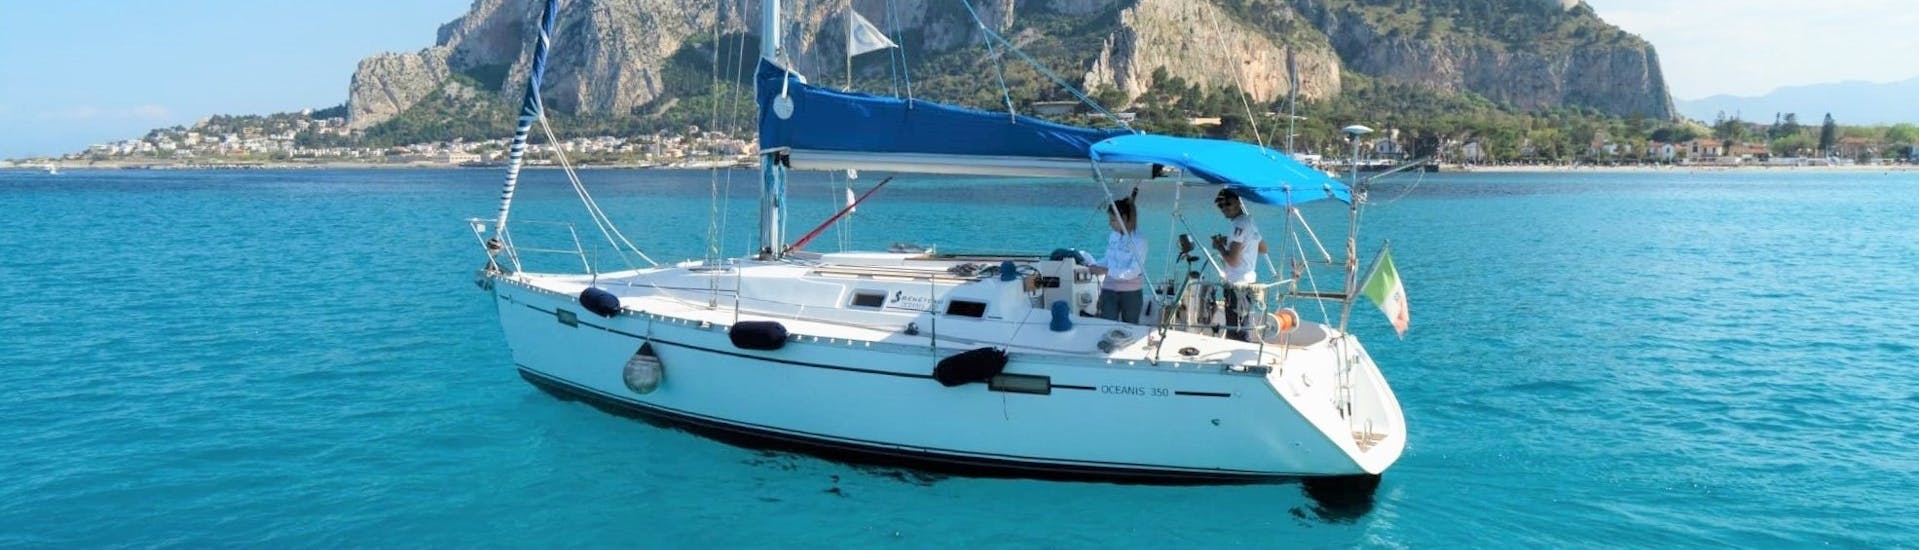 The sailboat used by Seica Boat during the private boat trip from Palermo to Mondello beach with apéritif.